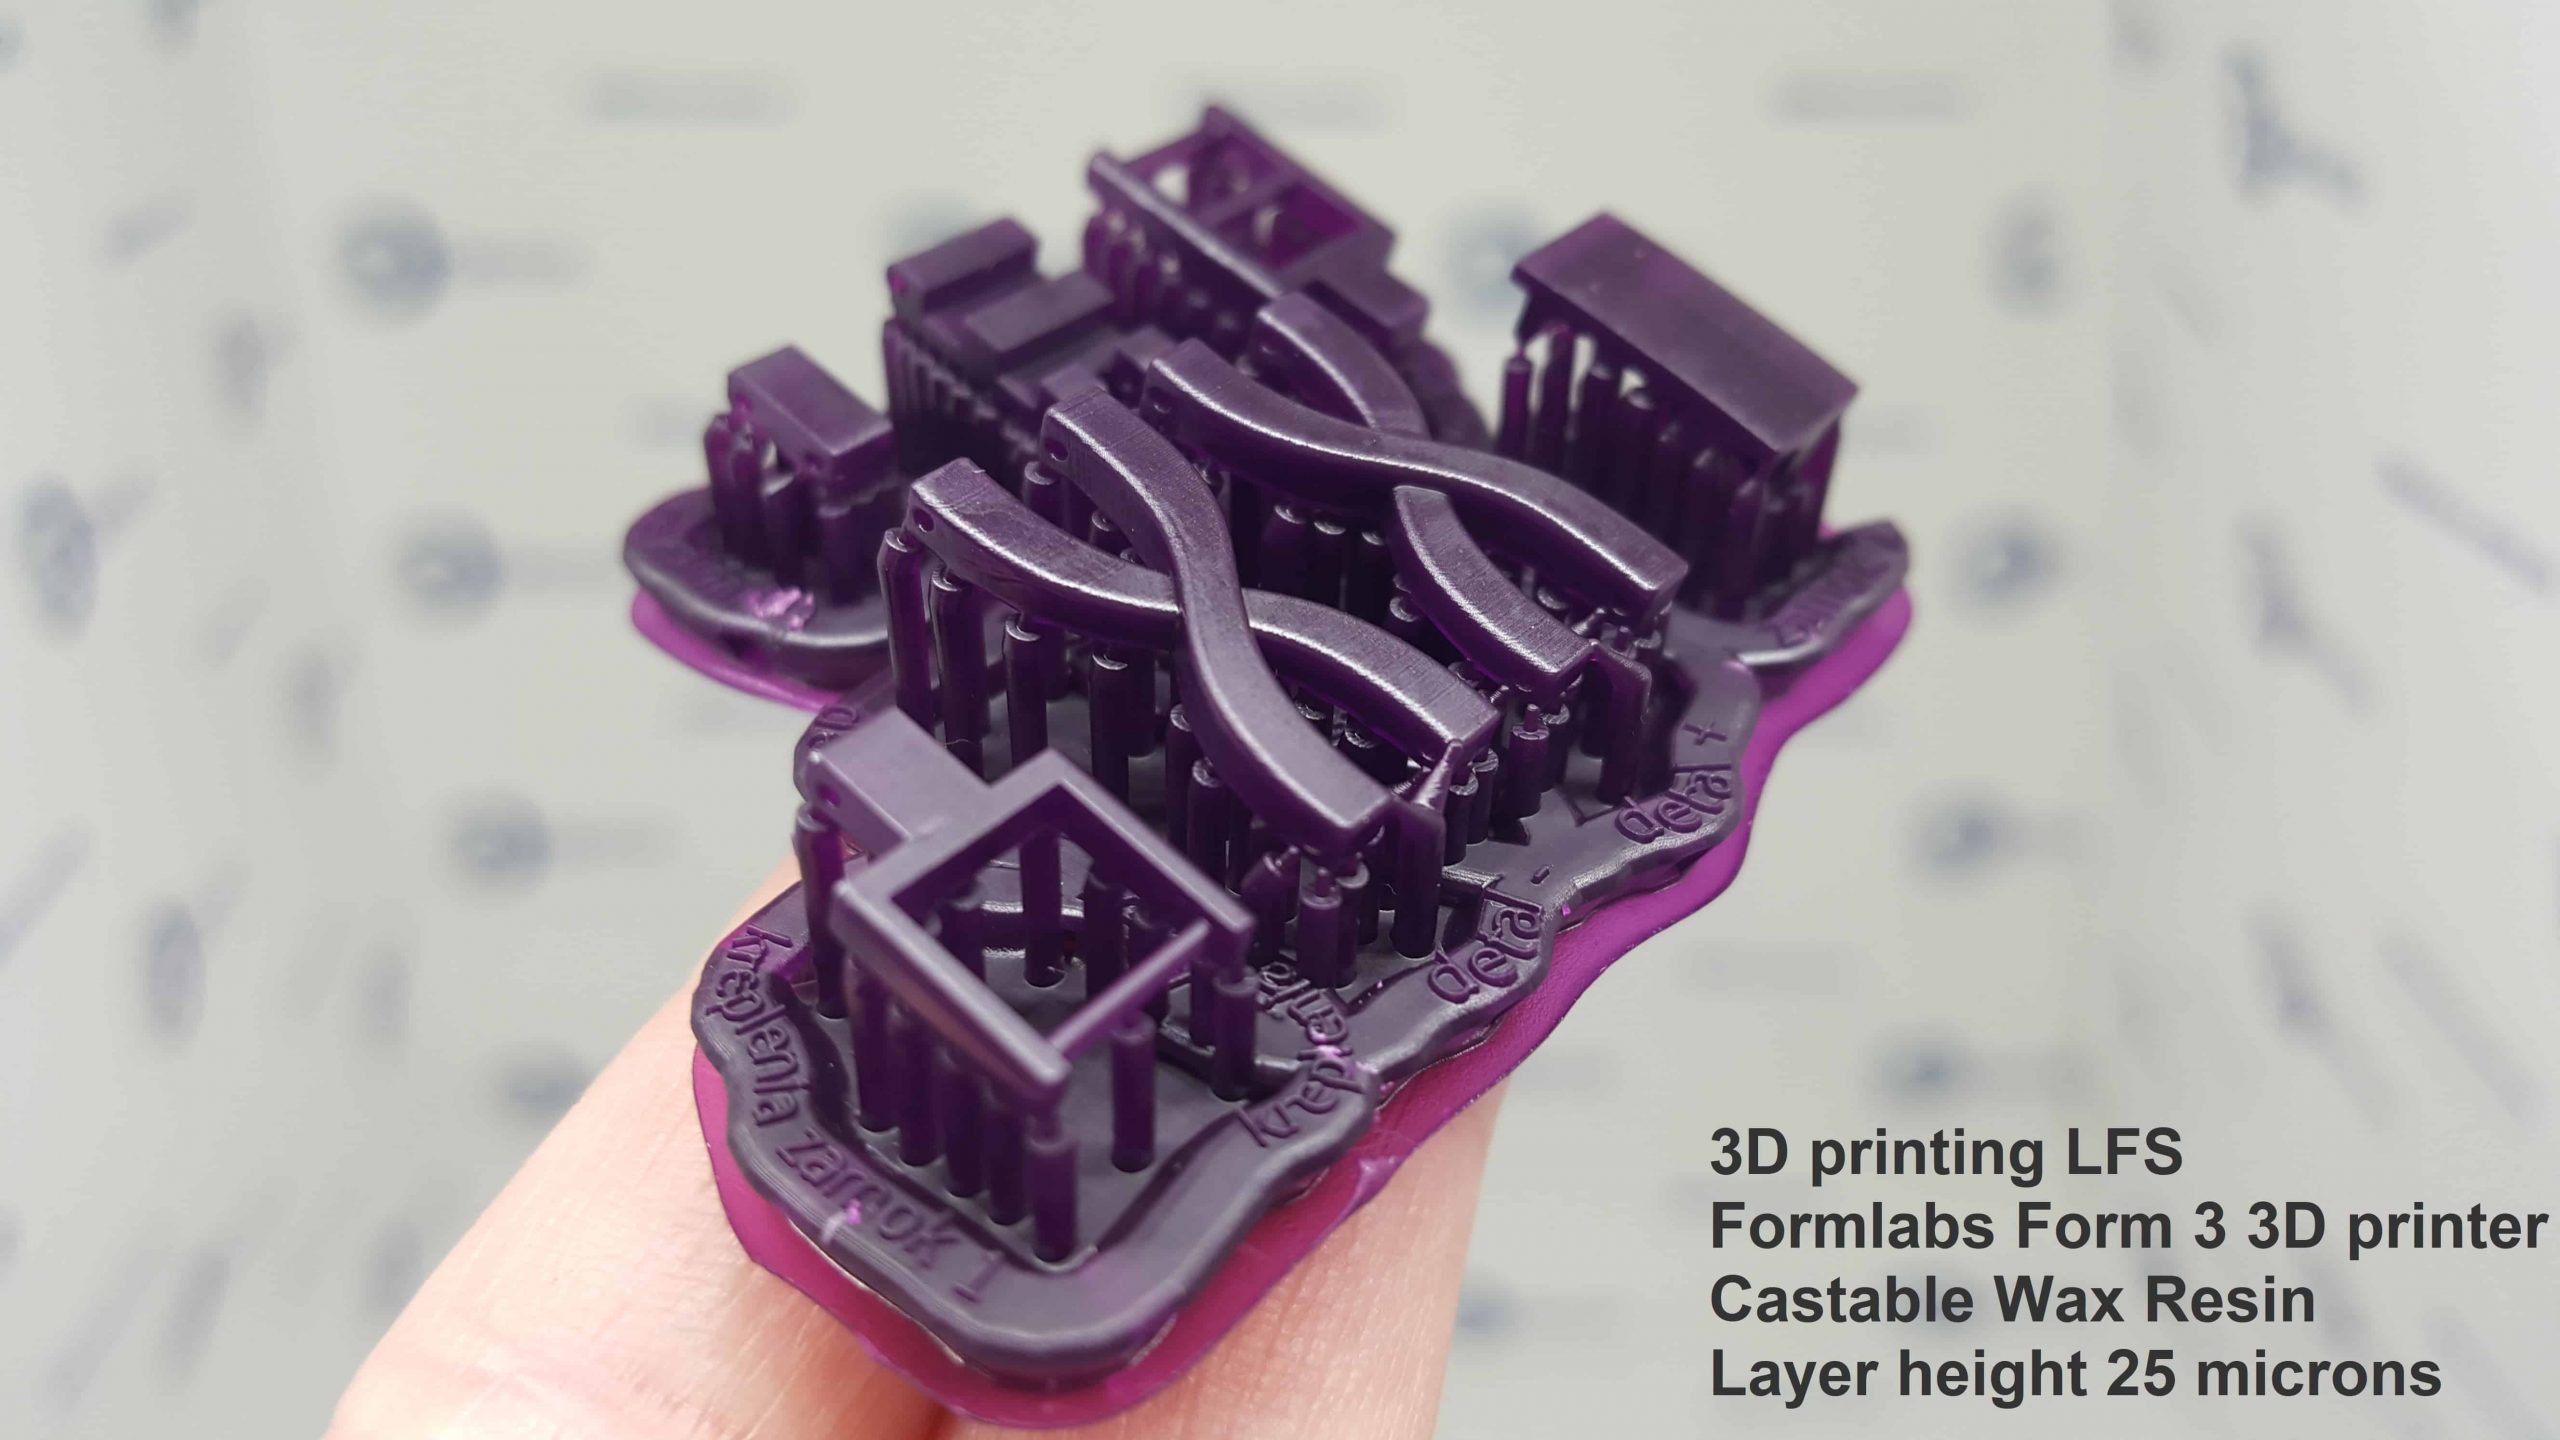 3D printed jewelry chain parts Castable Wax